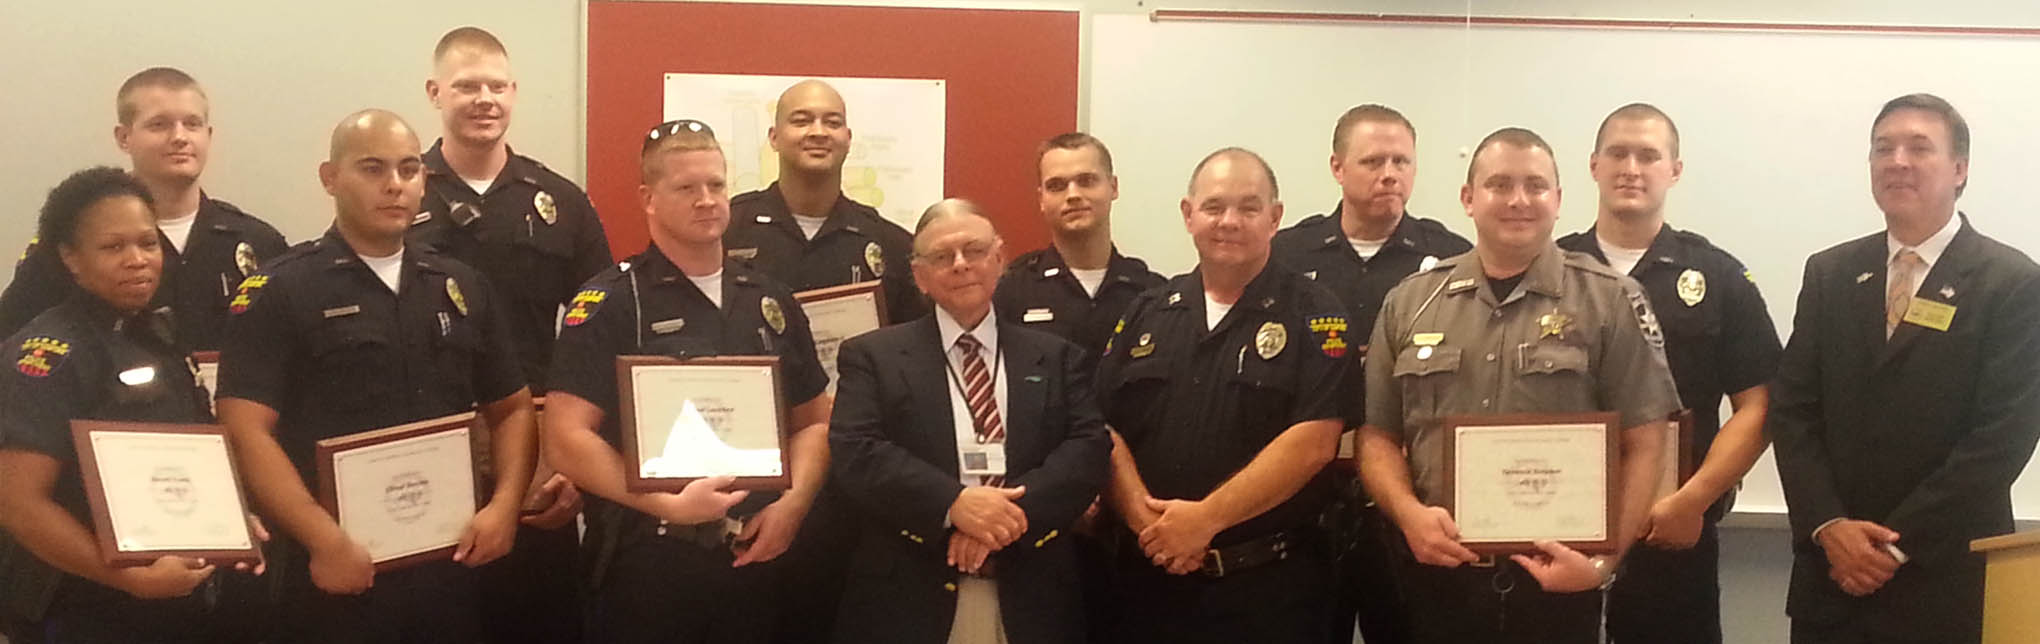 Eleven graduate from Lee County Crisis Intervention Team training